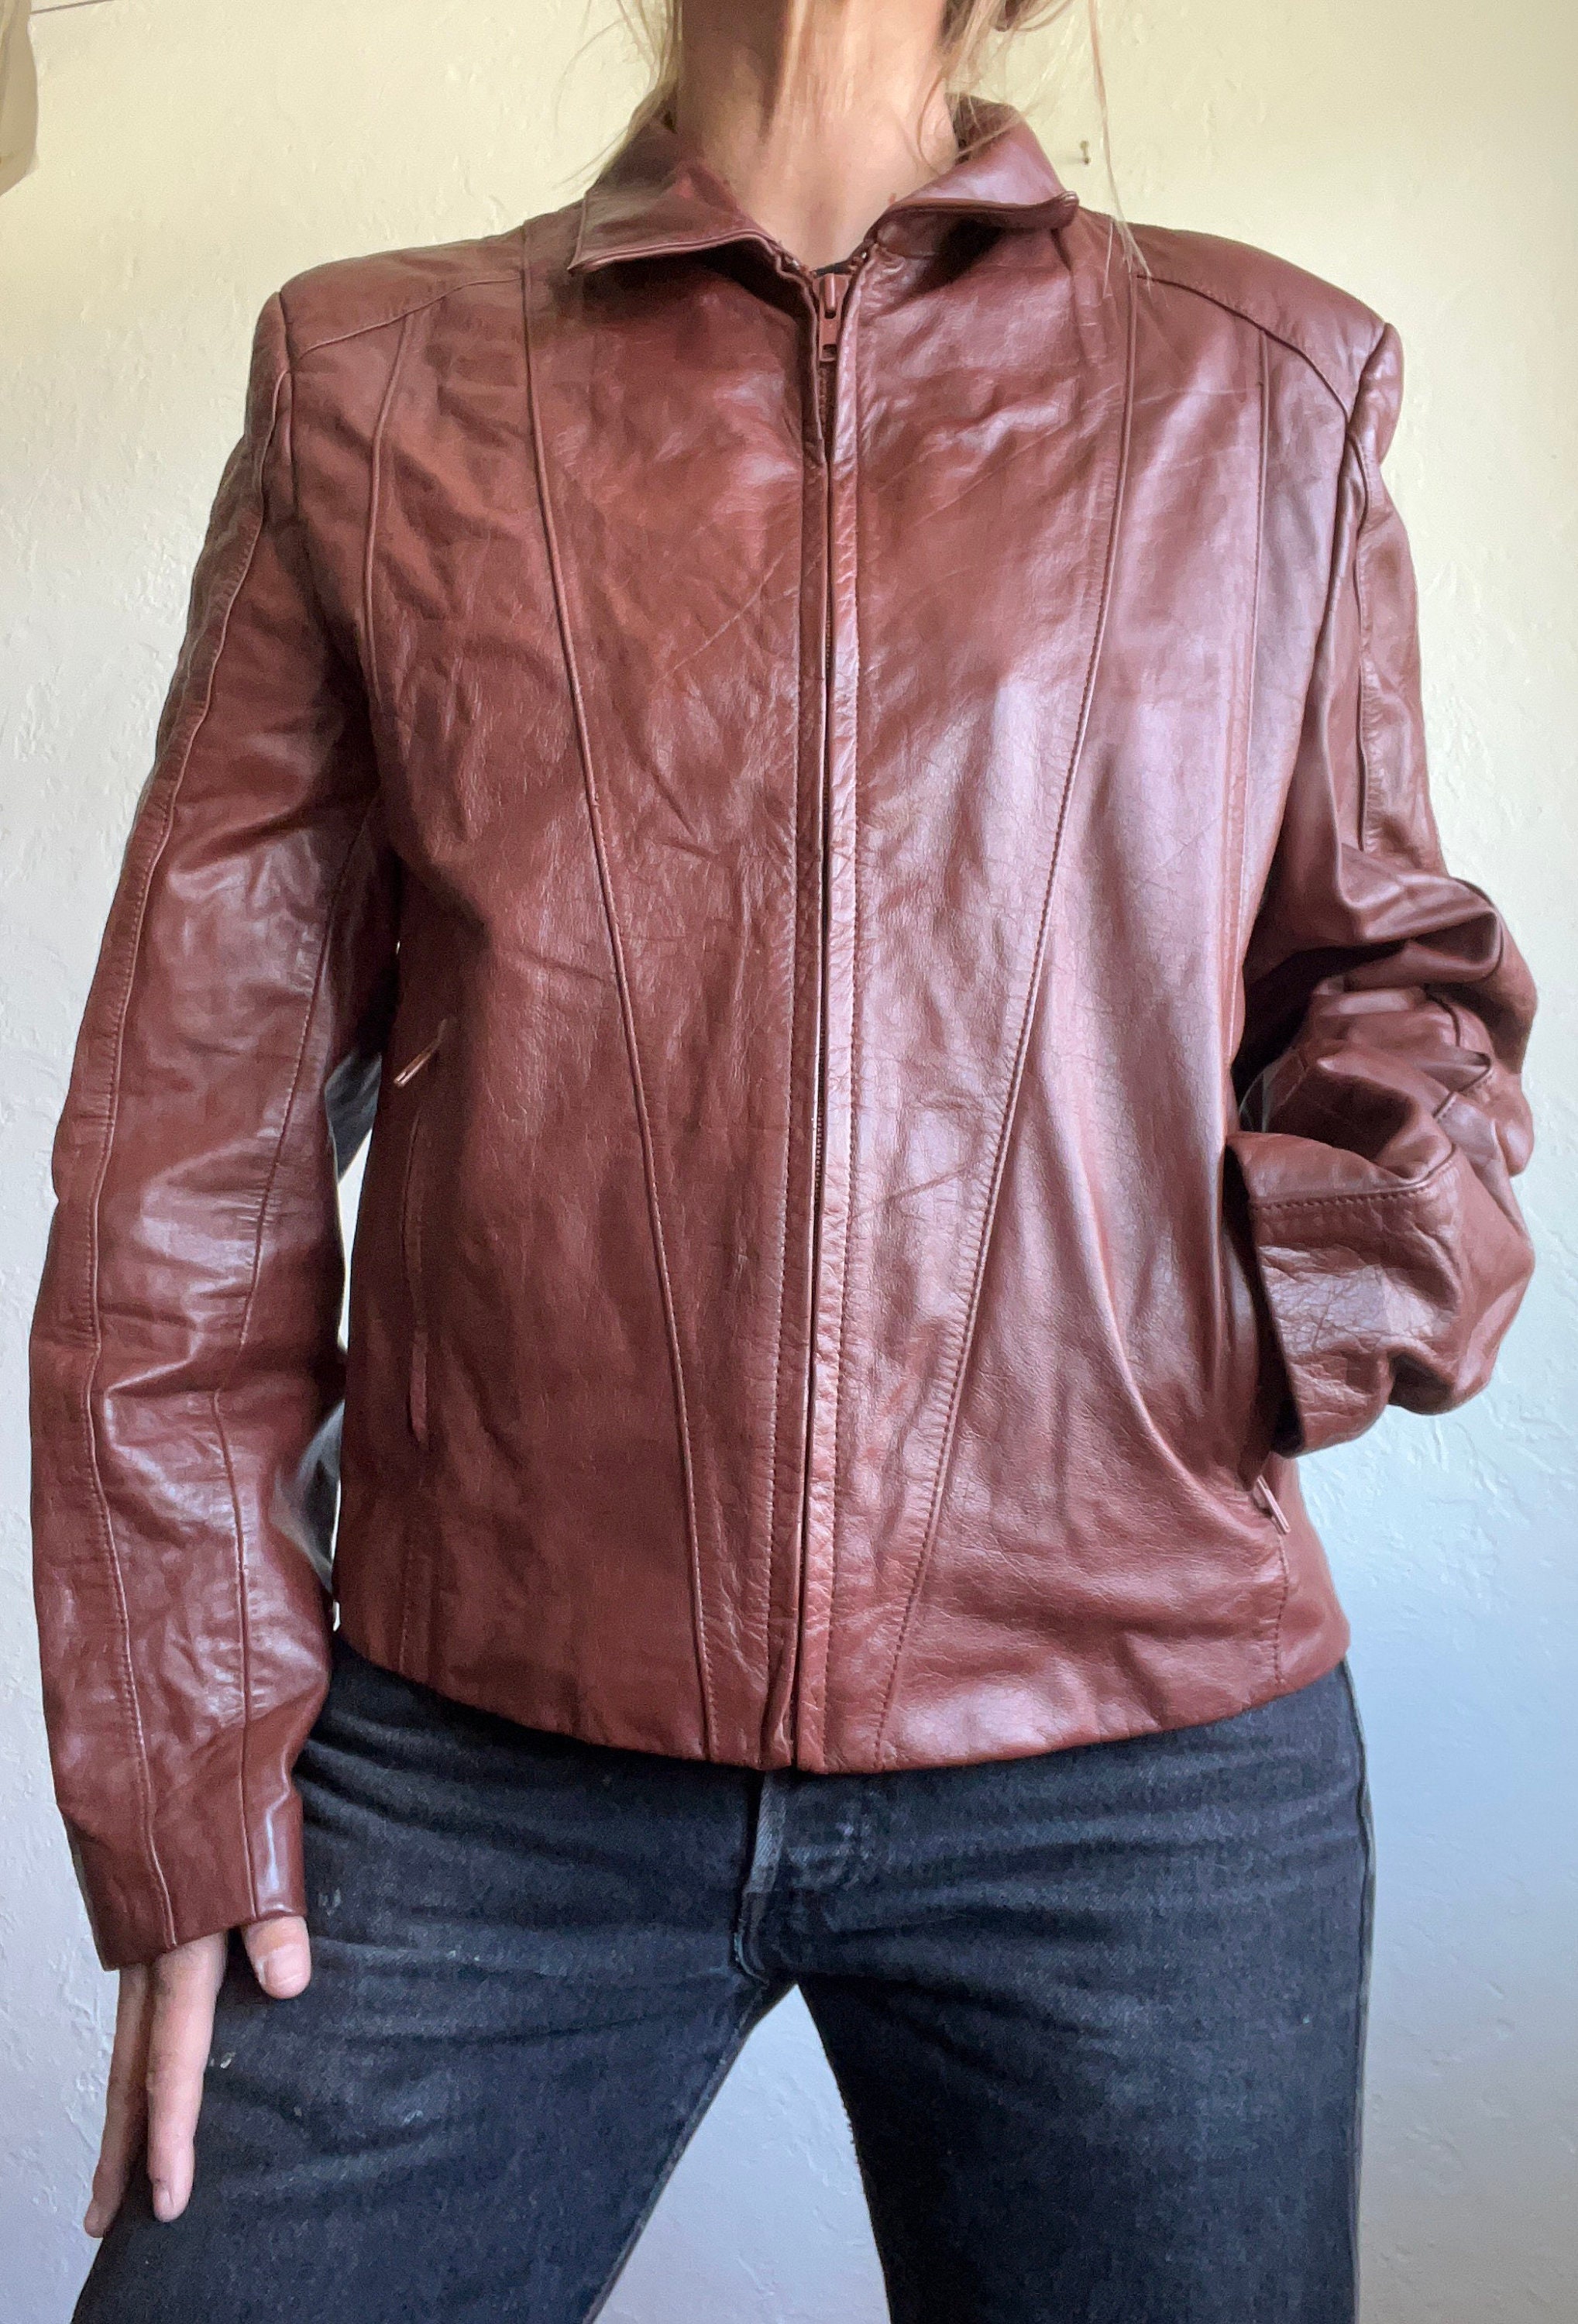 Snake Leather Distressed Pattern Women Dark Maroon Red Leather Jacket -  Leather Skin Shop